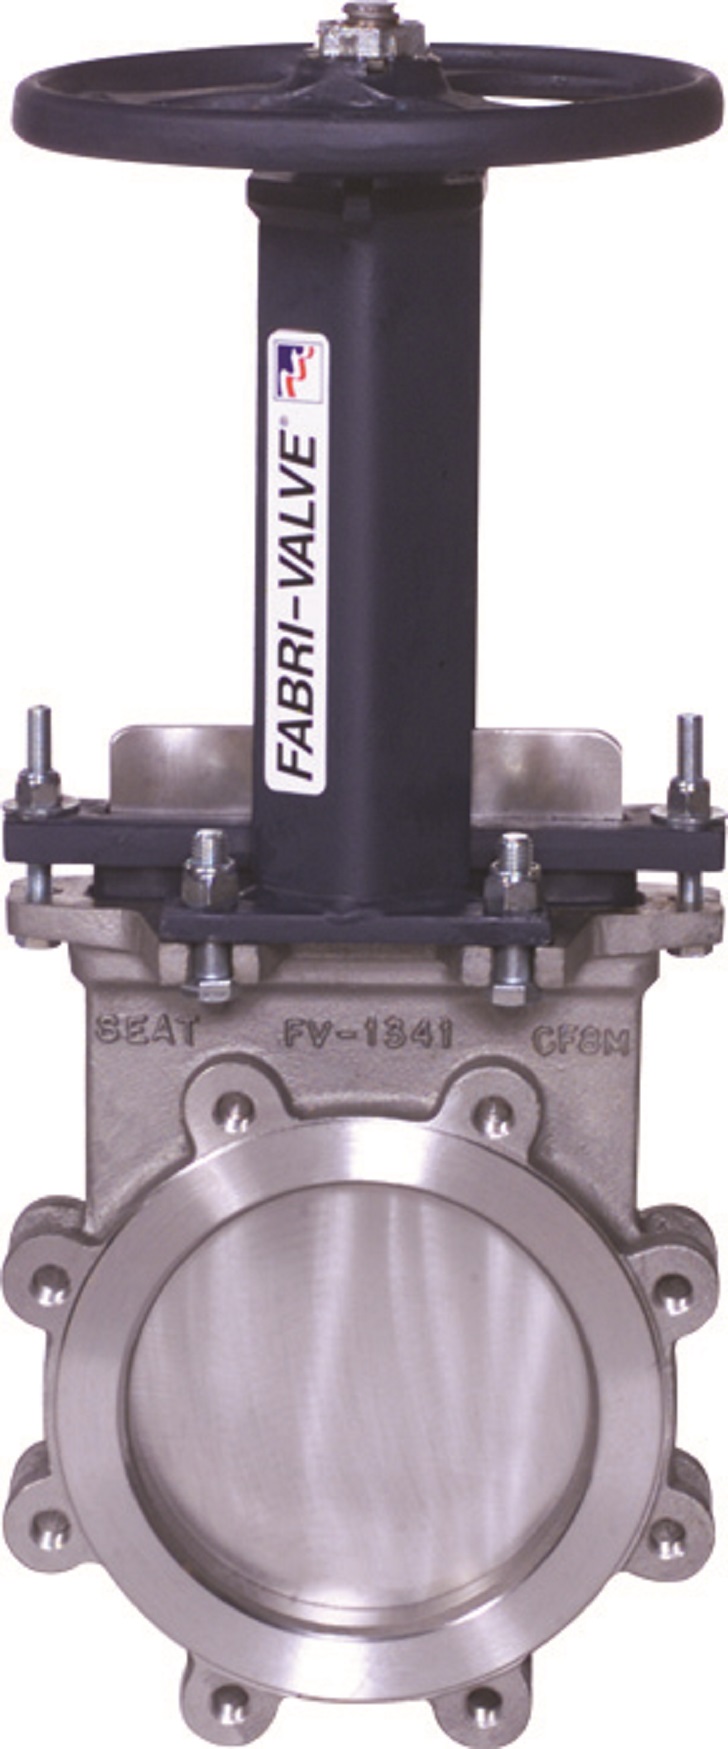 ITT's brand, Engineered Valves, has achieved IEC 61508 certification for certain knife gate valves and its GV cylinder.